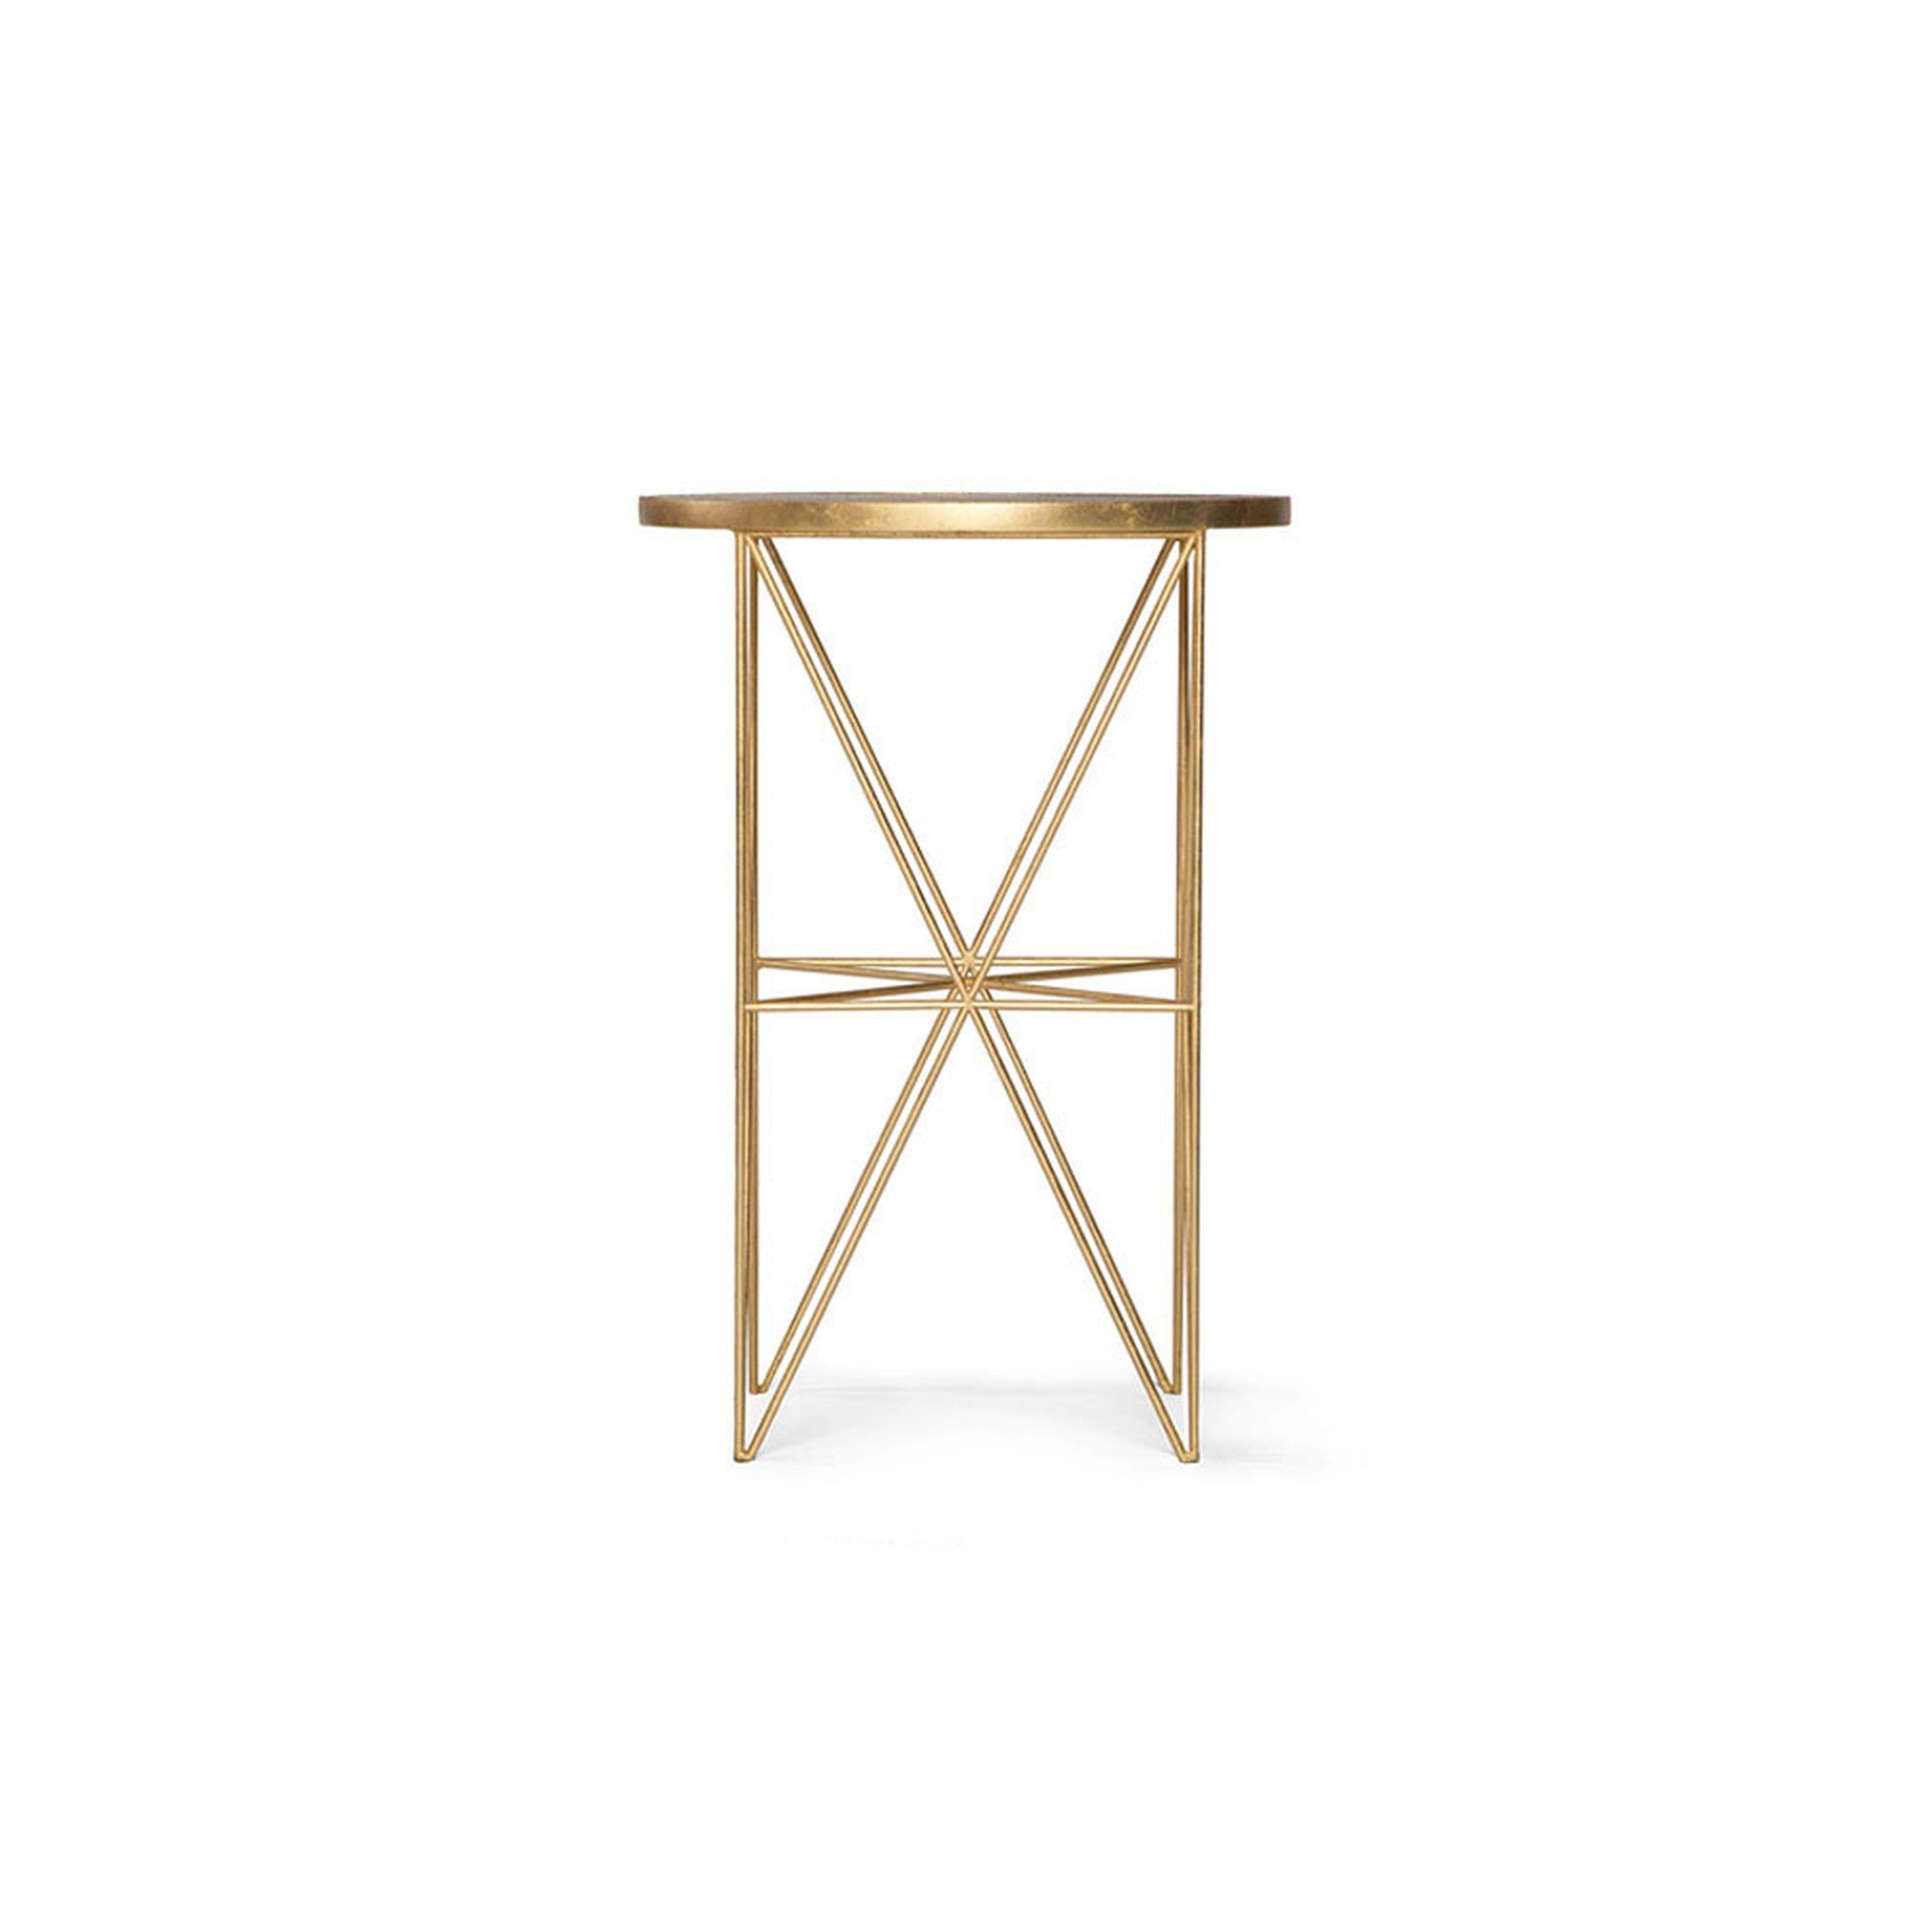 This handmade Monterey tall side table features an intricate hand-gilded metal base and a hand- nished wood top. Elegant and functional, this side table uni es style and aesthetic by adding a touch of Old Hollywood glitz on a hand-gilded geometric